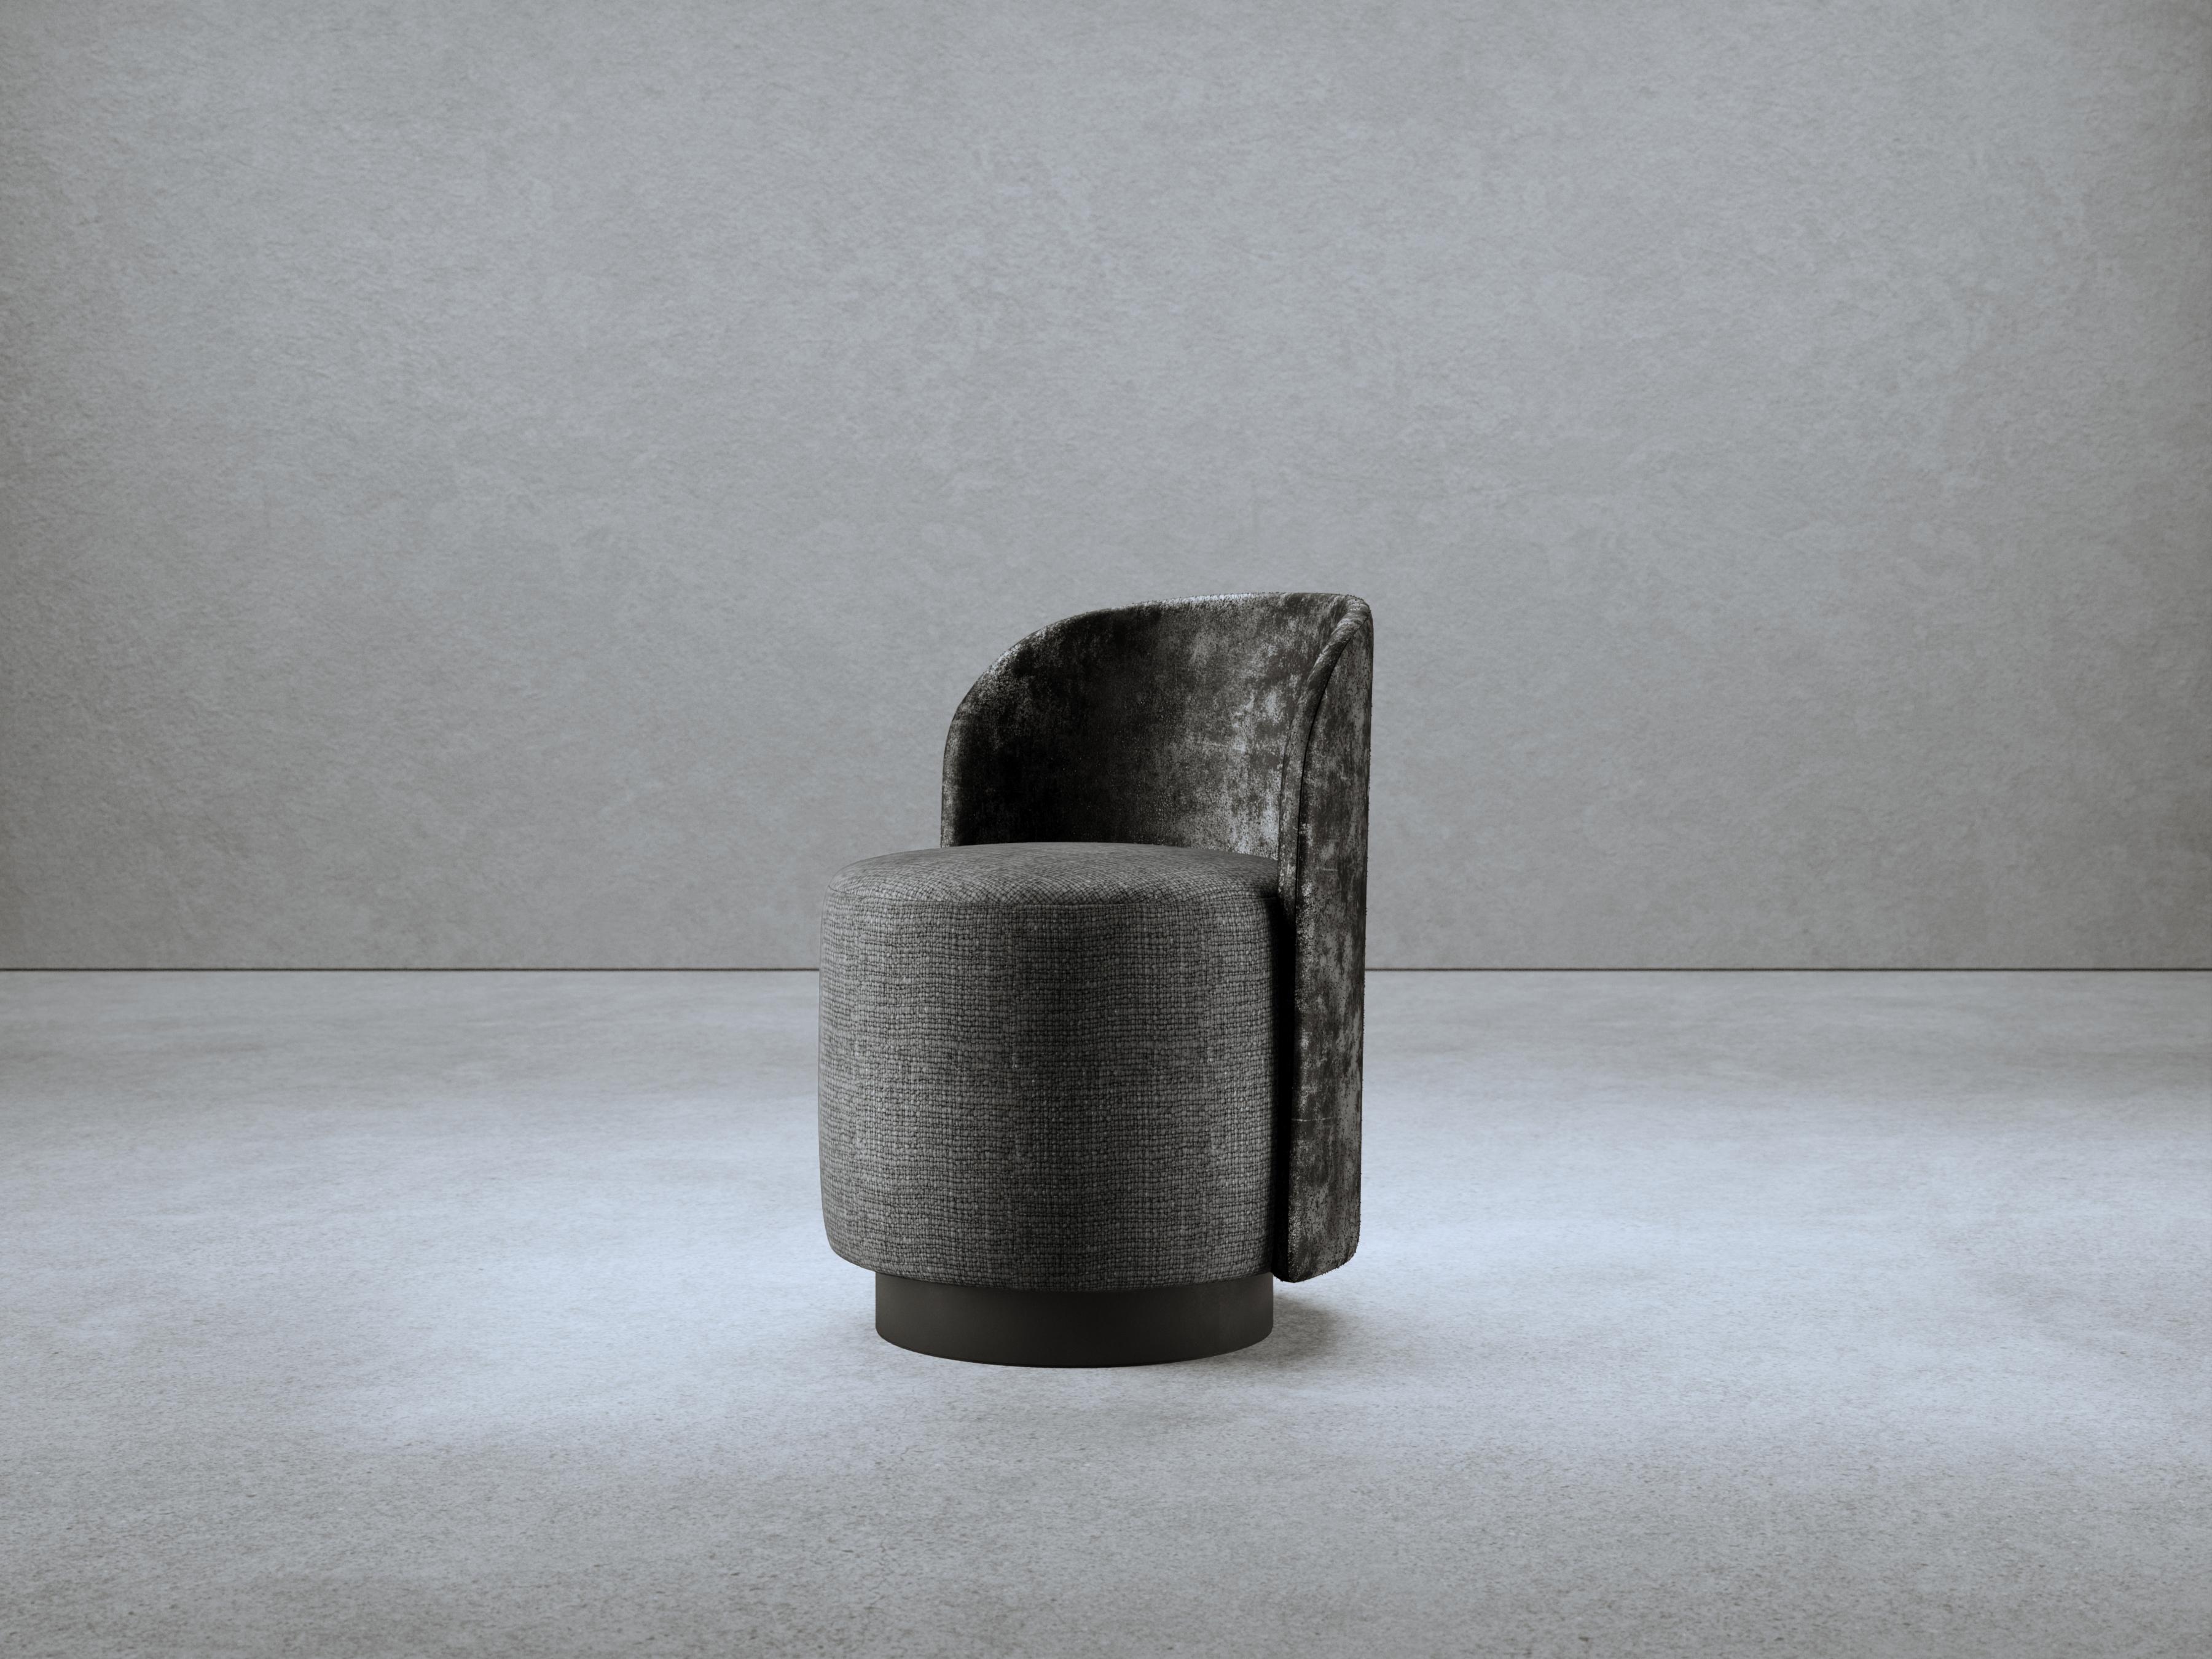 Dig It Chair by Gio Pagani
Dimensions: D 54 x W 56 x H 74 cm. SH: 47 cm.
Materials: Loro Piana Linen and black wild leather.

In a fluid society capable of mixing infinite social and cultural varieties, the nostalgic search for reworked aesthetics